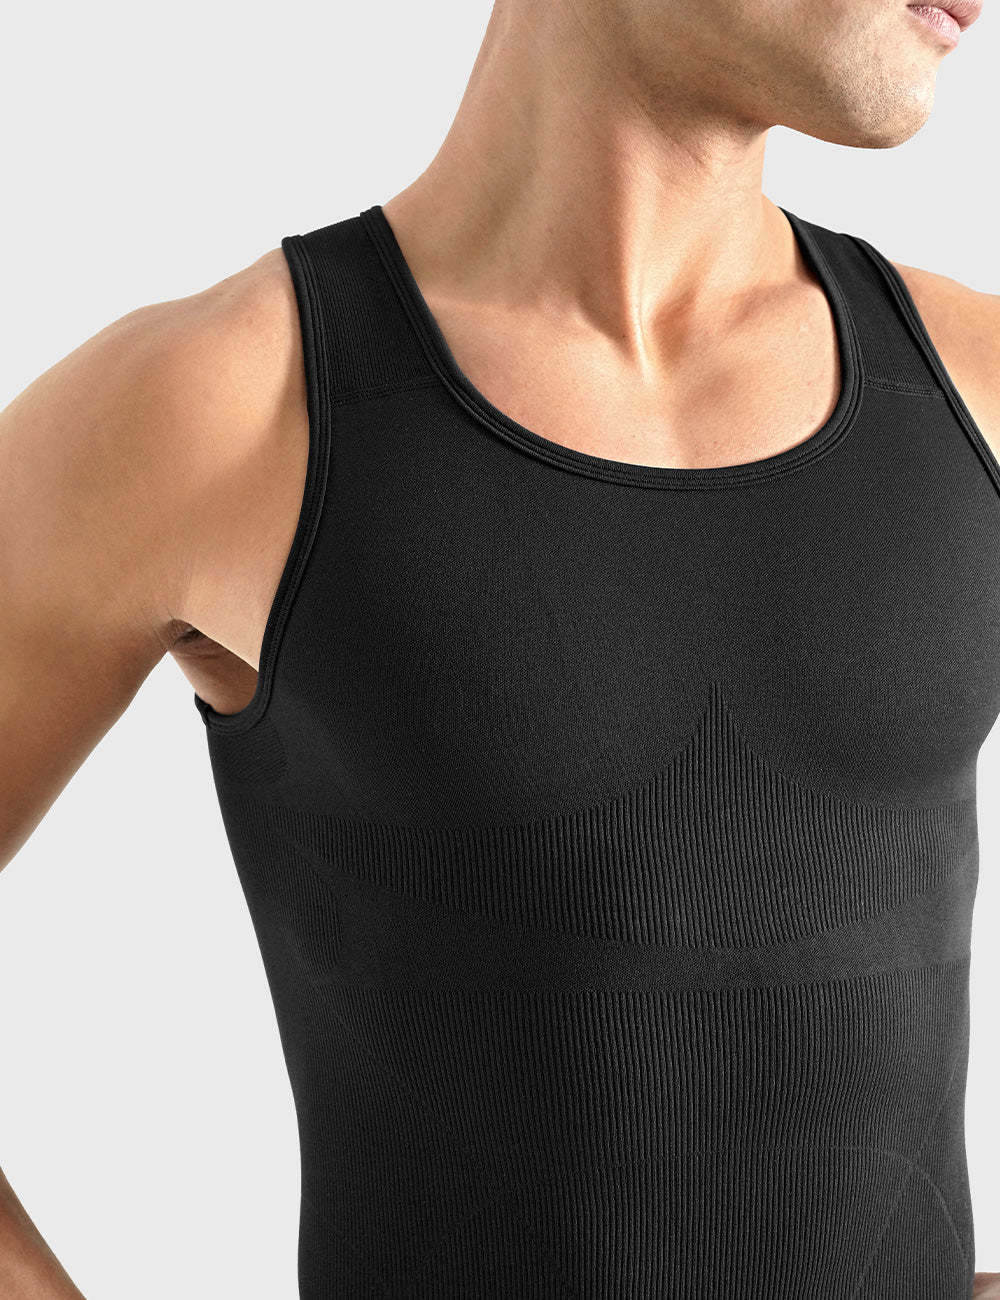 Mens Cotton Singlet - Purpose Physiotherapy